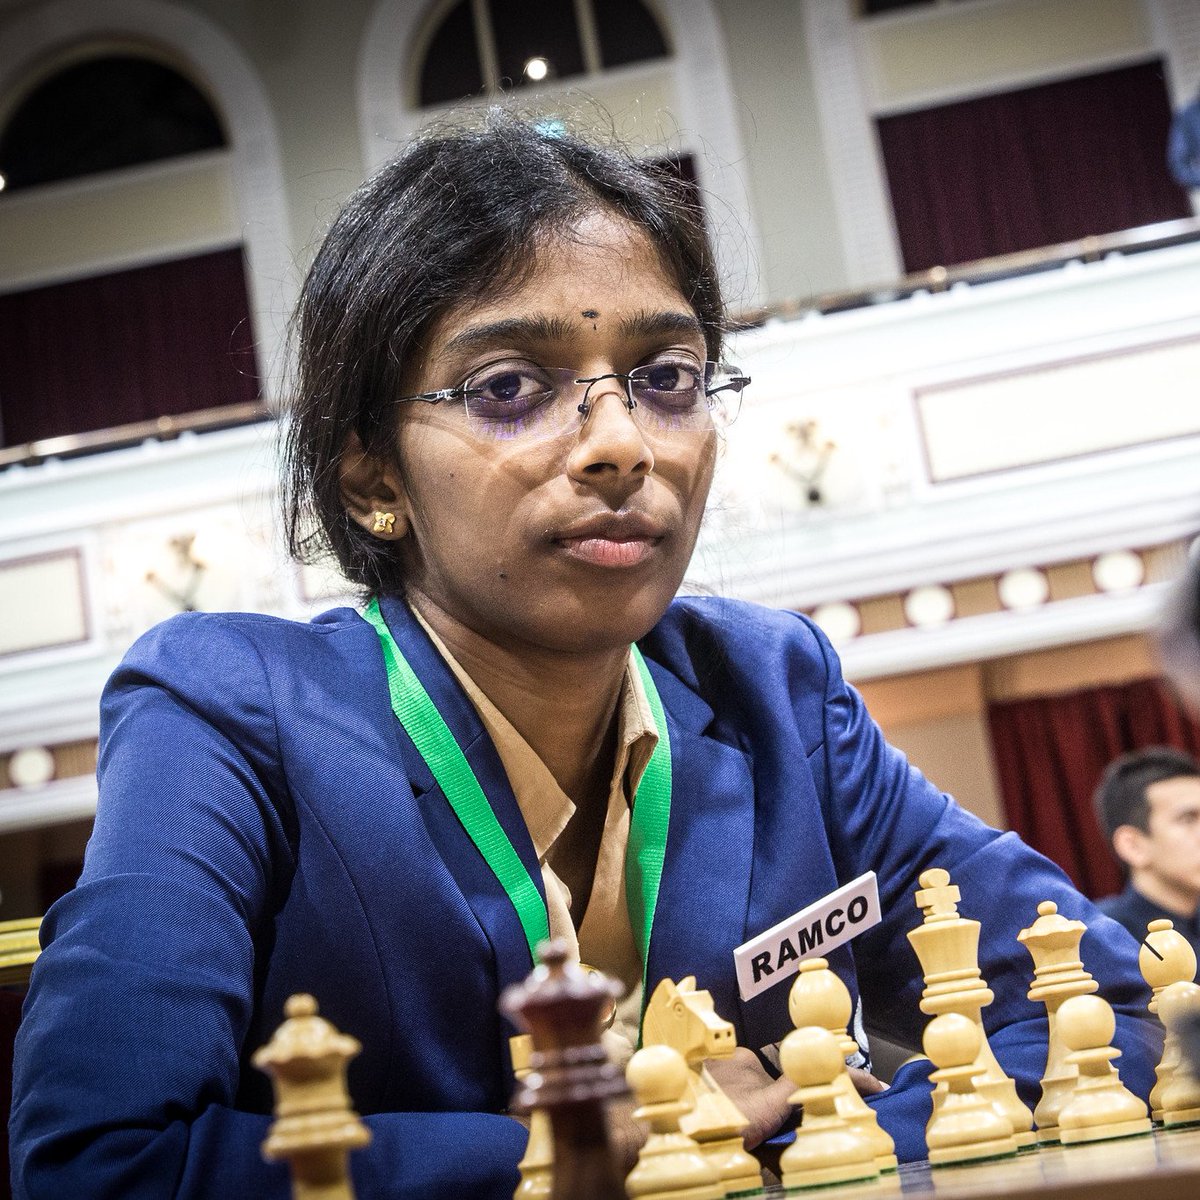 In shadows of brother Pragg for some time, R Vaishali, India's 3rd woman GM, has now made a mark for herself, says coach